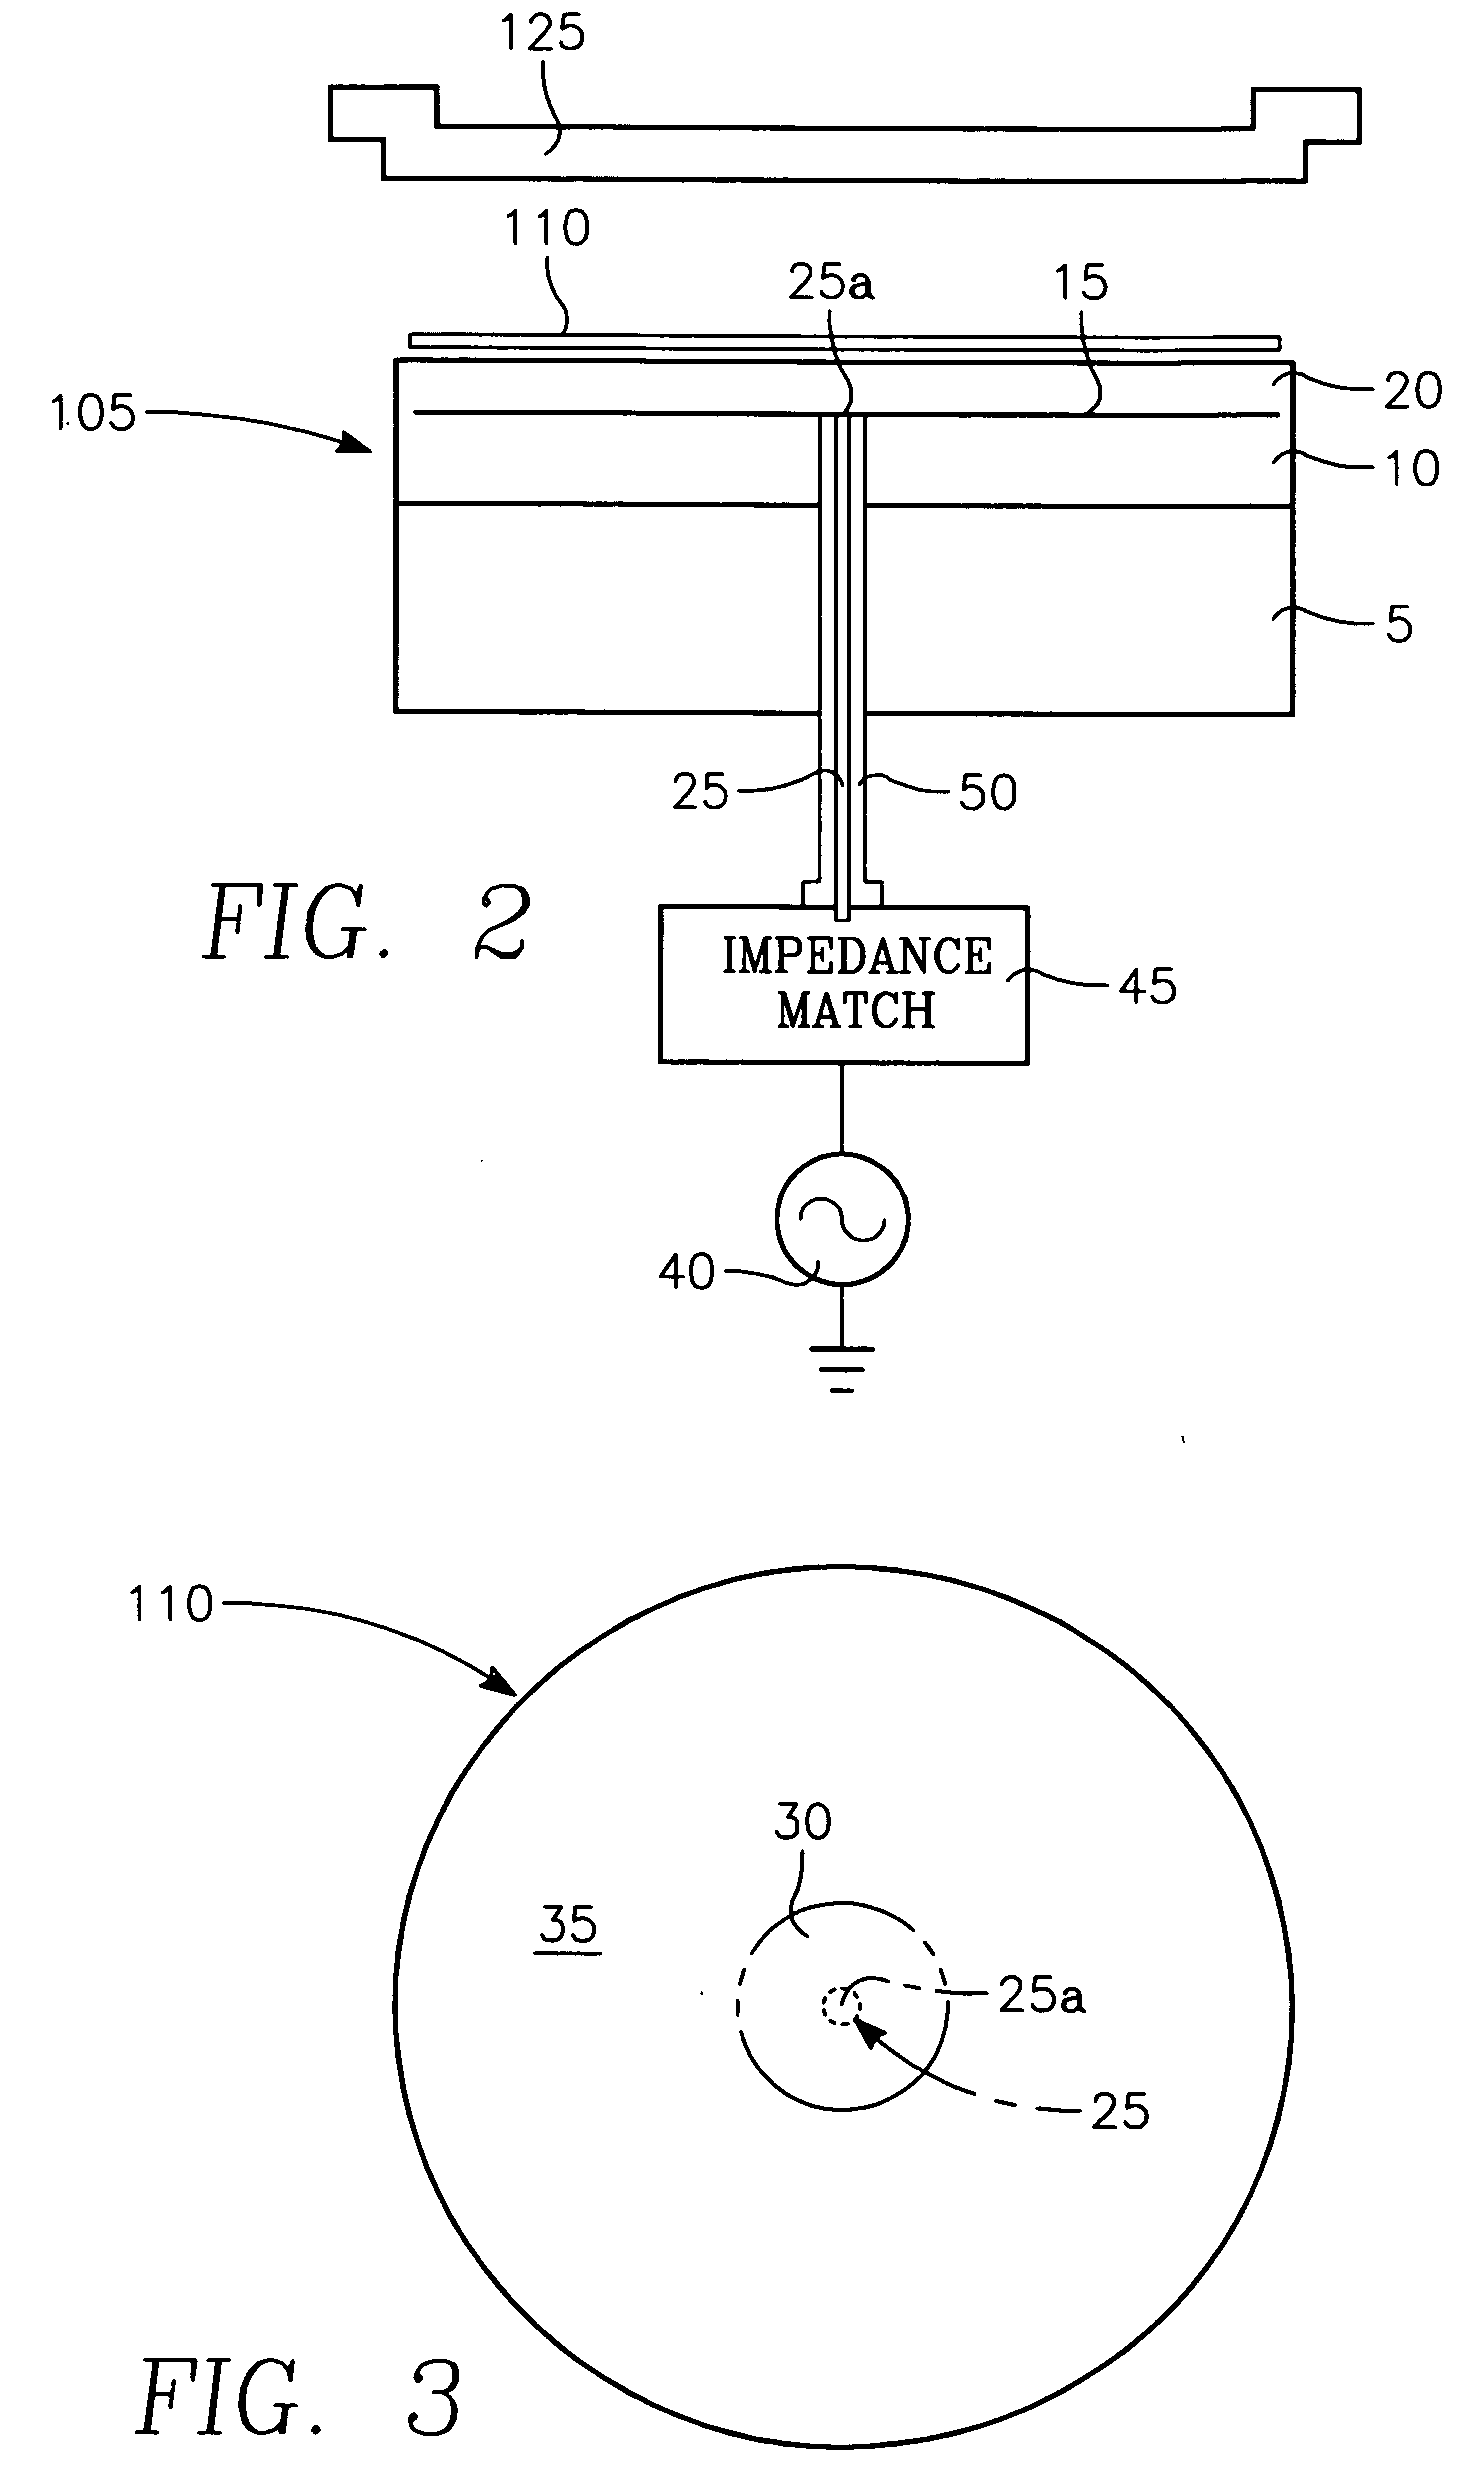 Method of cooling a wafer support at a uniform temperature in a capacitively coupled plasma reactor